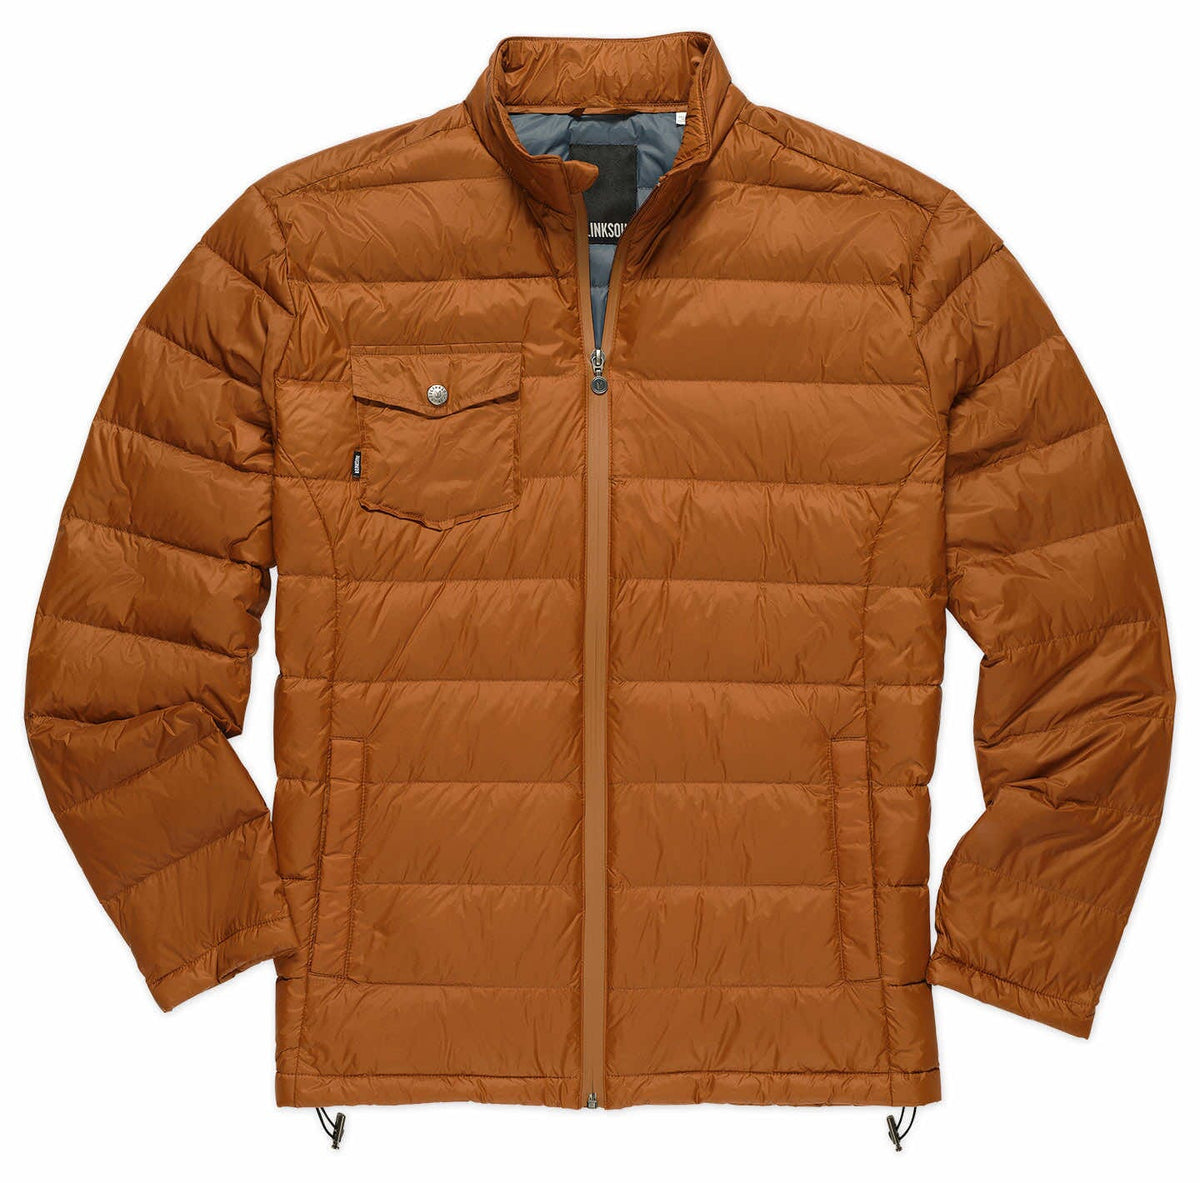 Hilgard Quilted Down Jacket